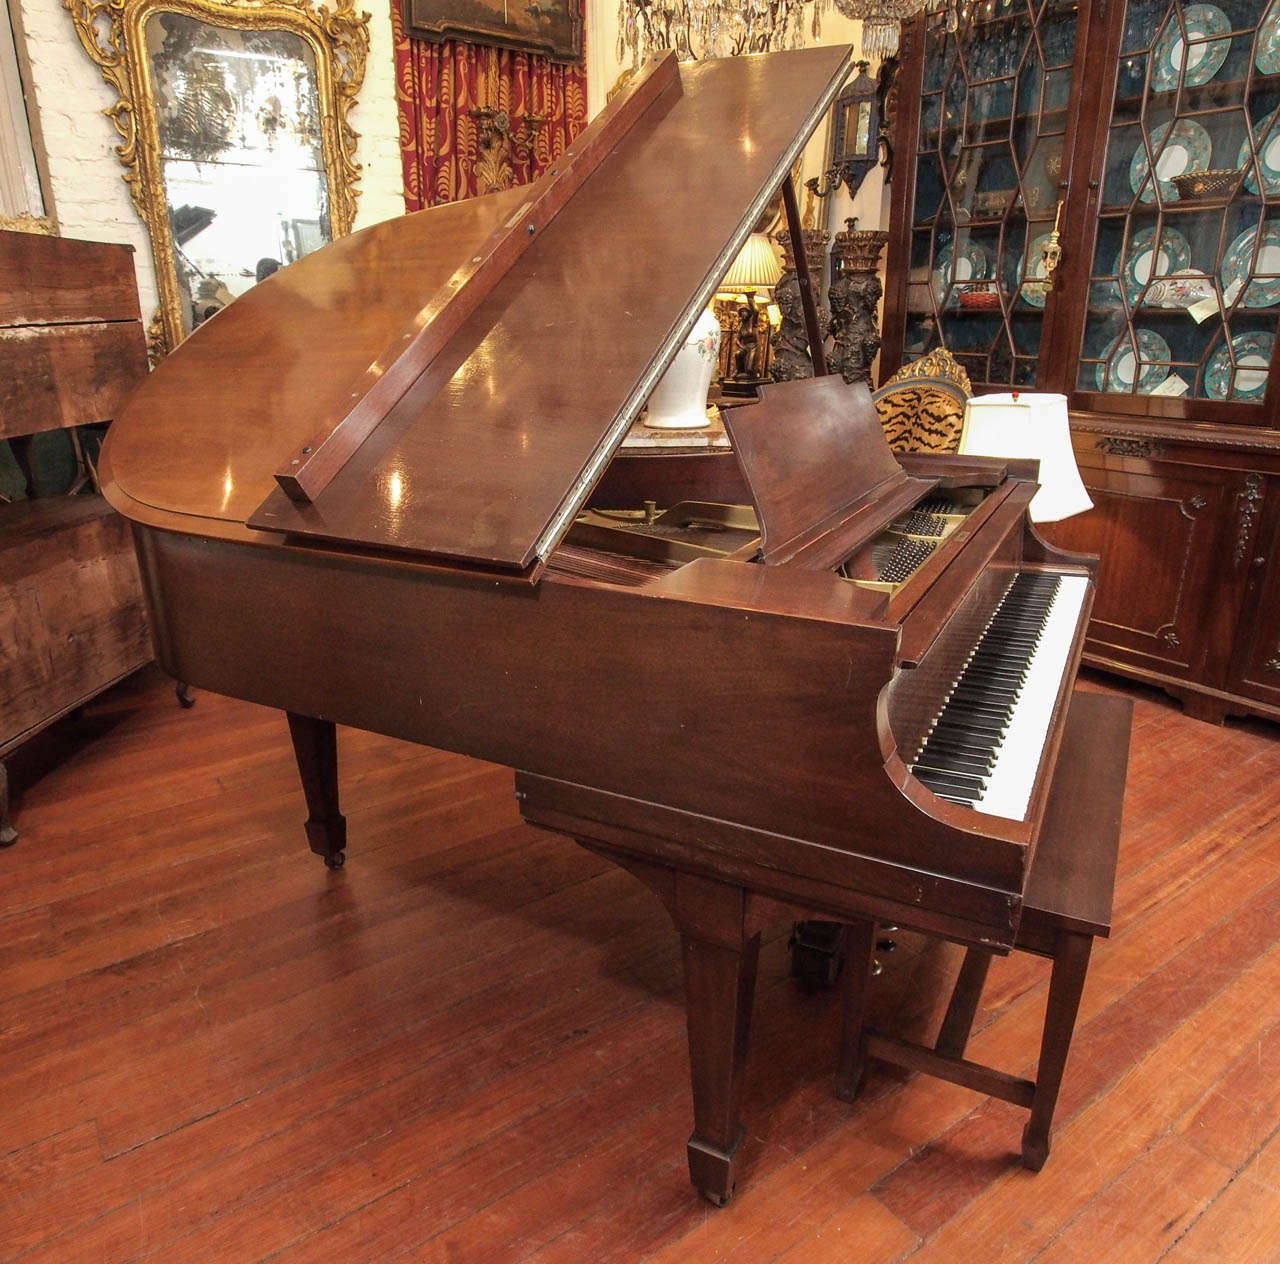 Steinway Model M Mahogany Grand Piano 1918 serial No. 192788 
This piano was totally overhauled in the 1980's according to verbal from the previous owner. We have had two strings replaced. Plays well and holds tune well. The case has some slight